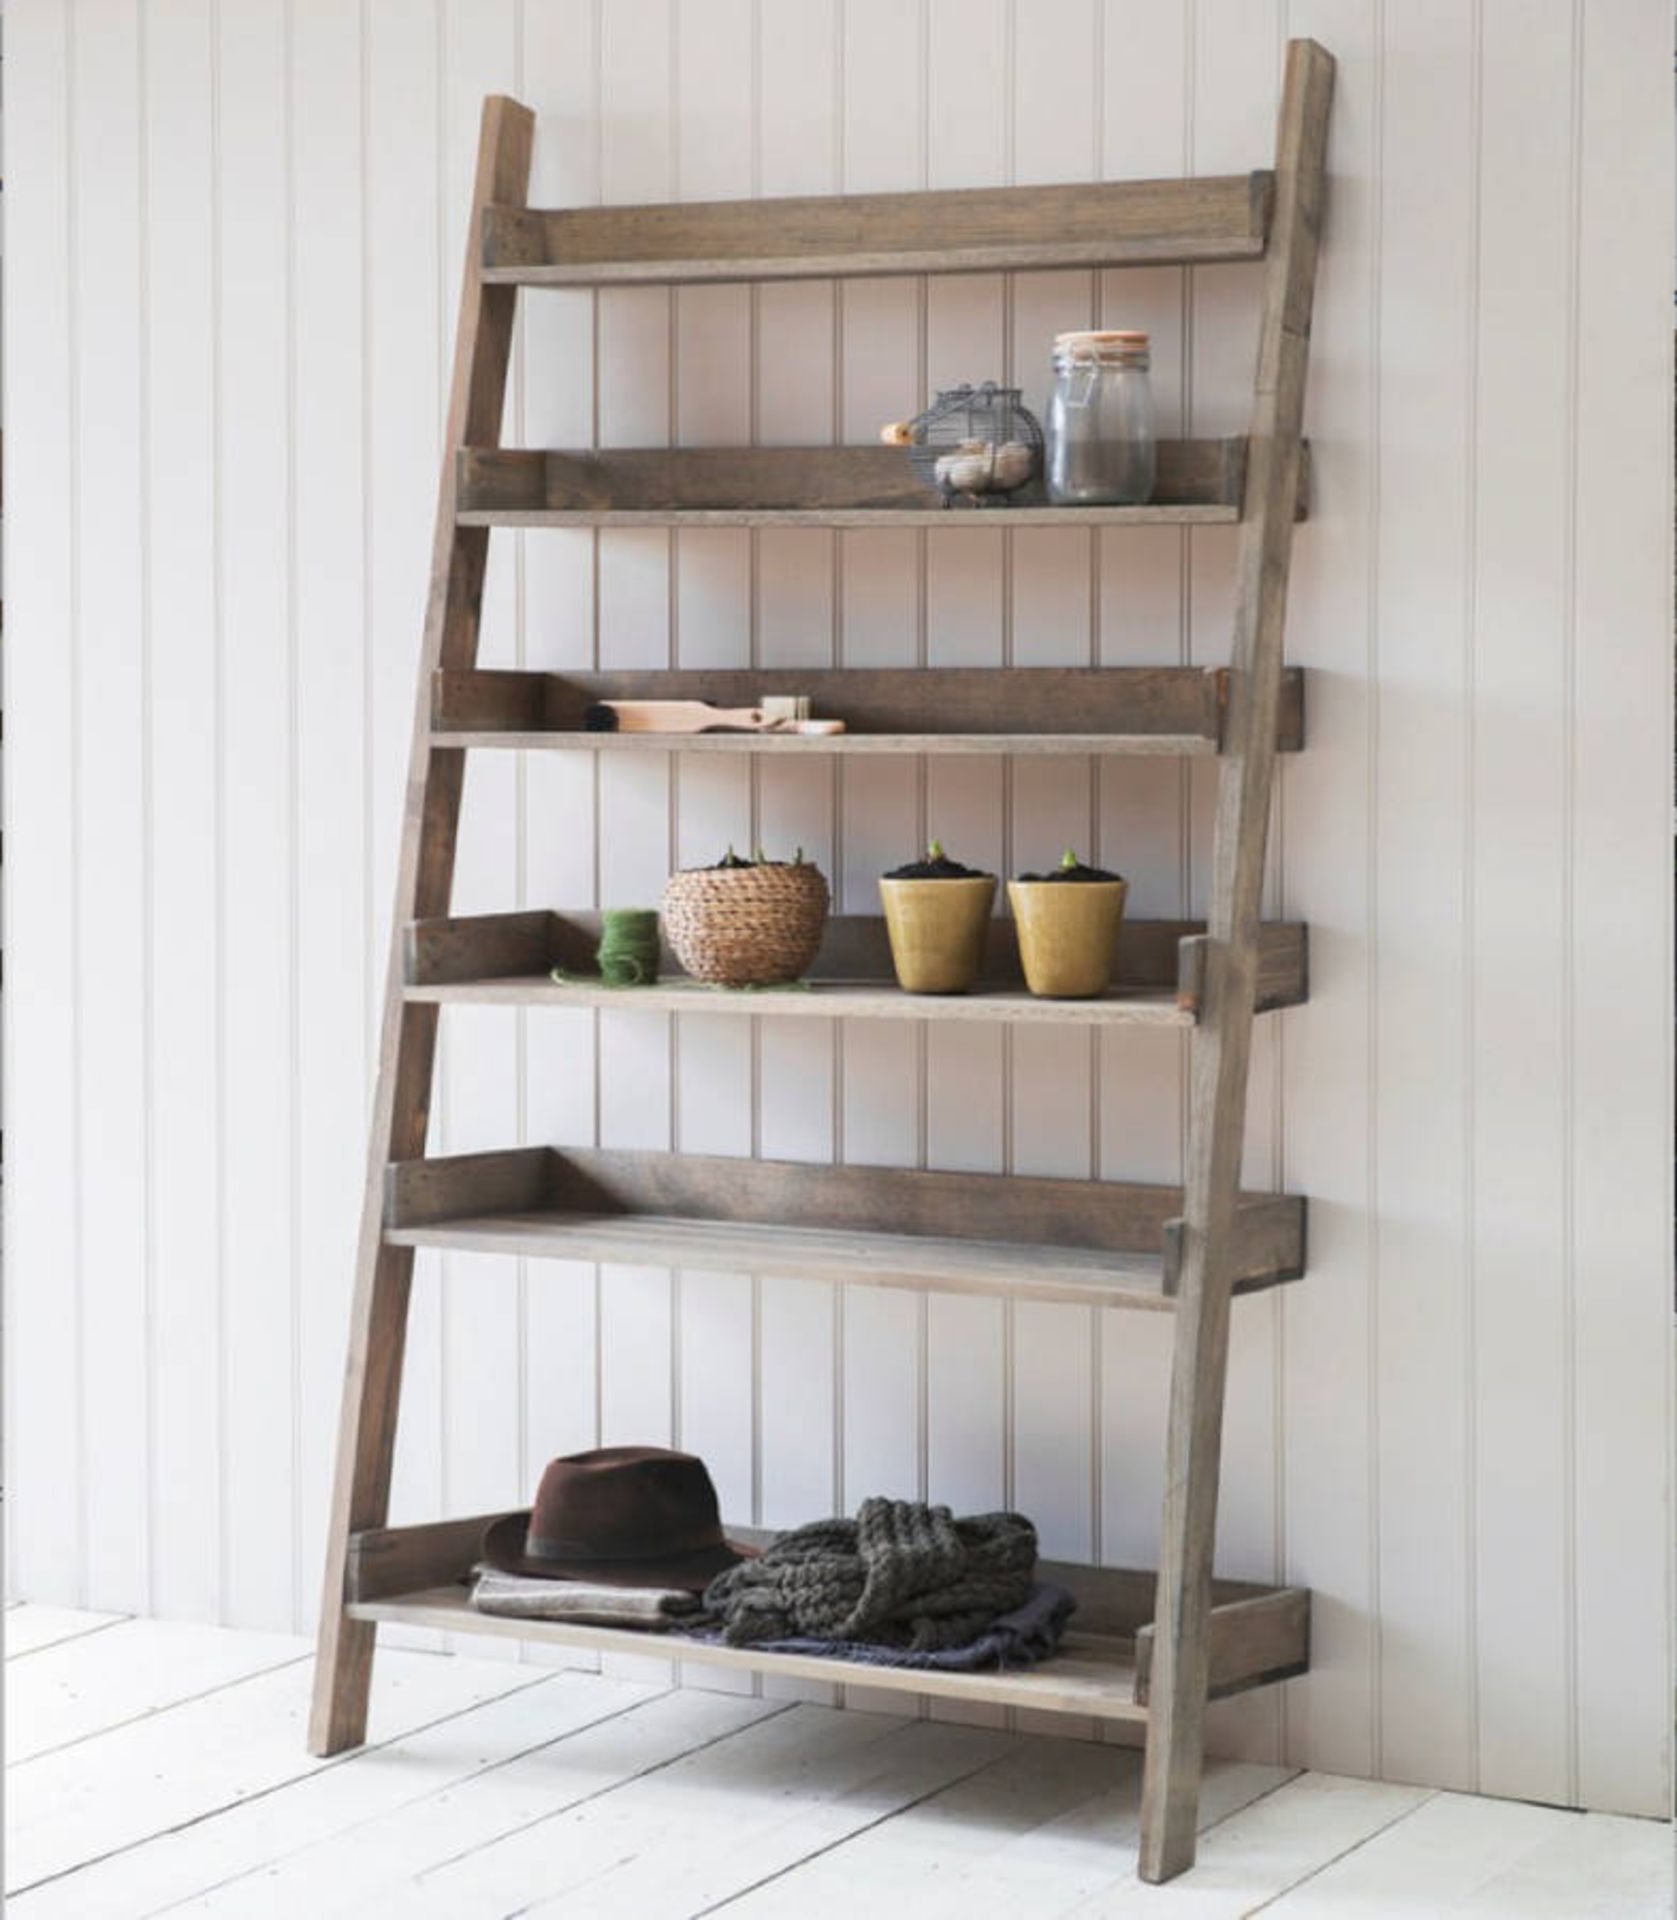 Loft Five Shelf Ladder Display Black Create an inspired space As an alternative to a traditional